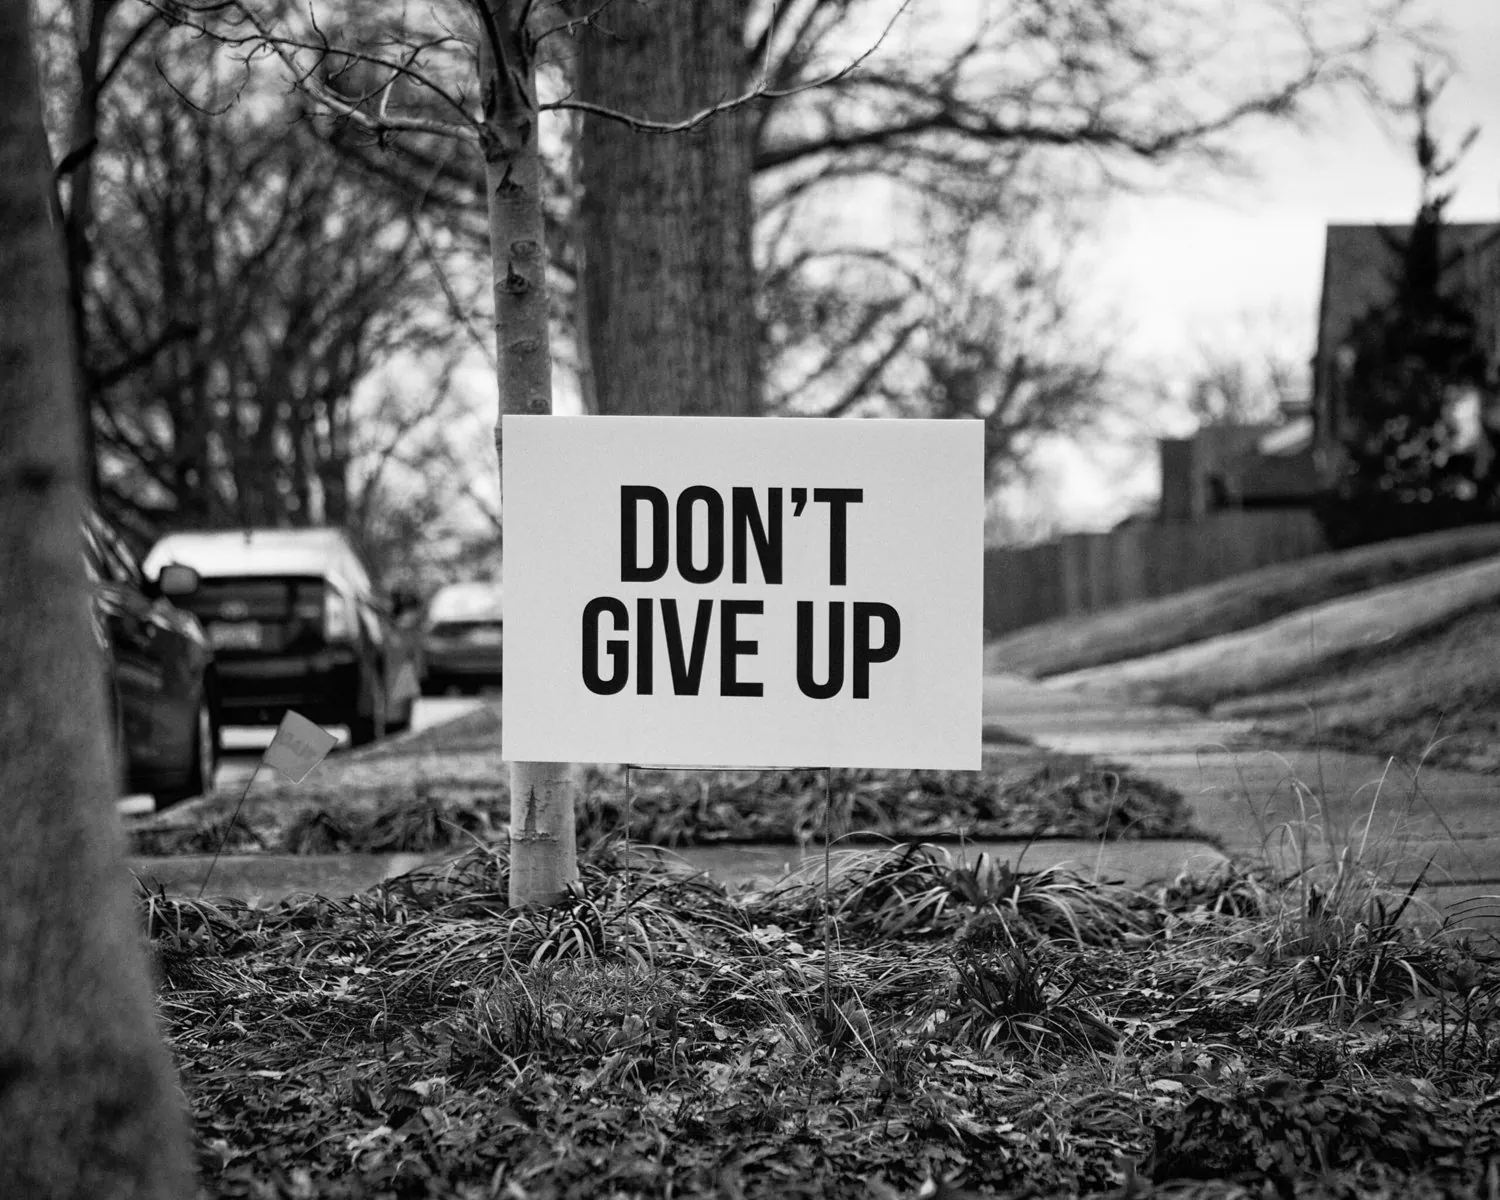 Don’t give up sign on a front yard